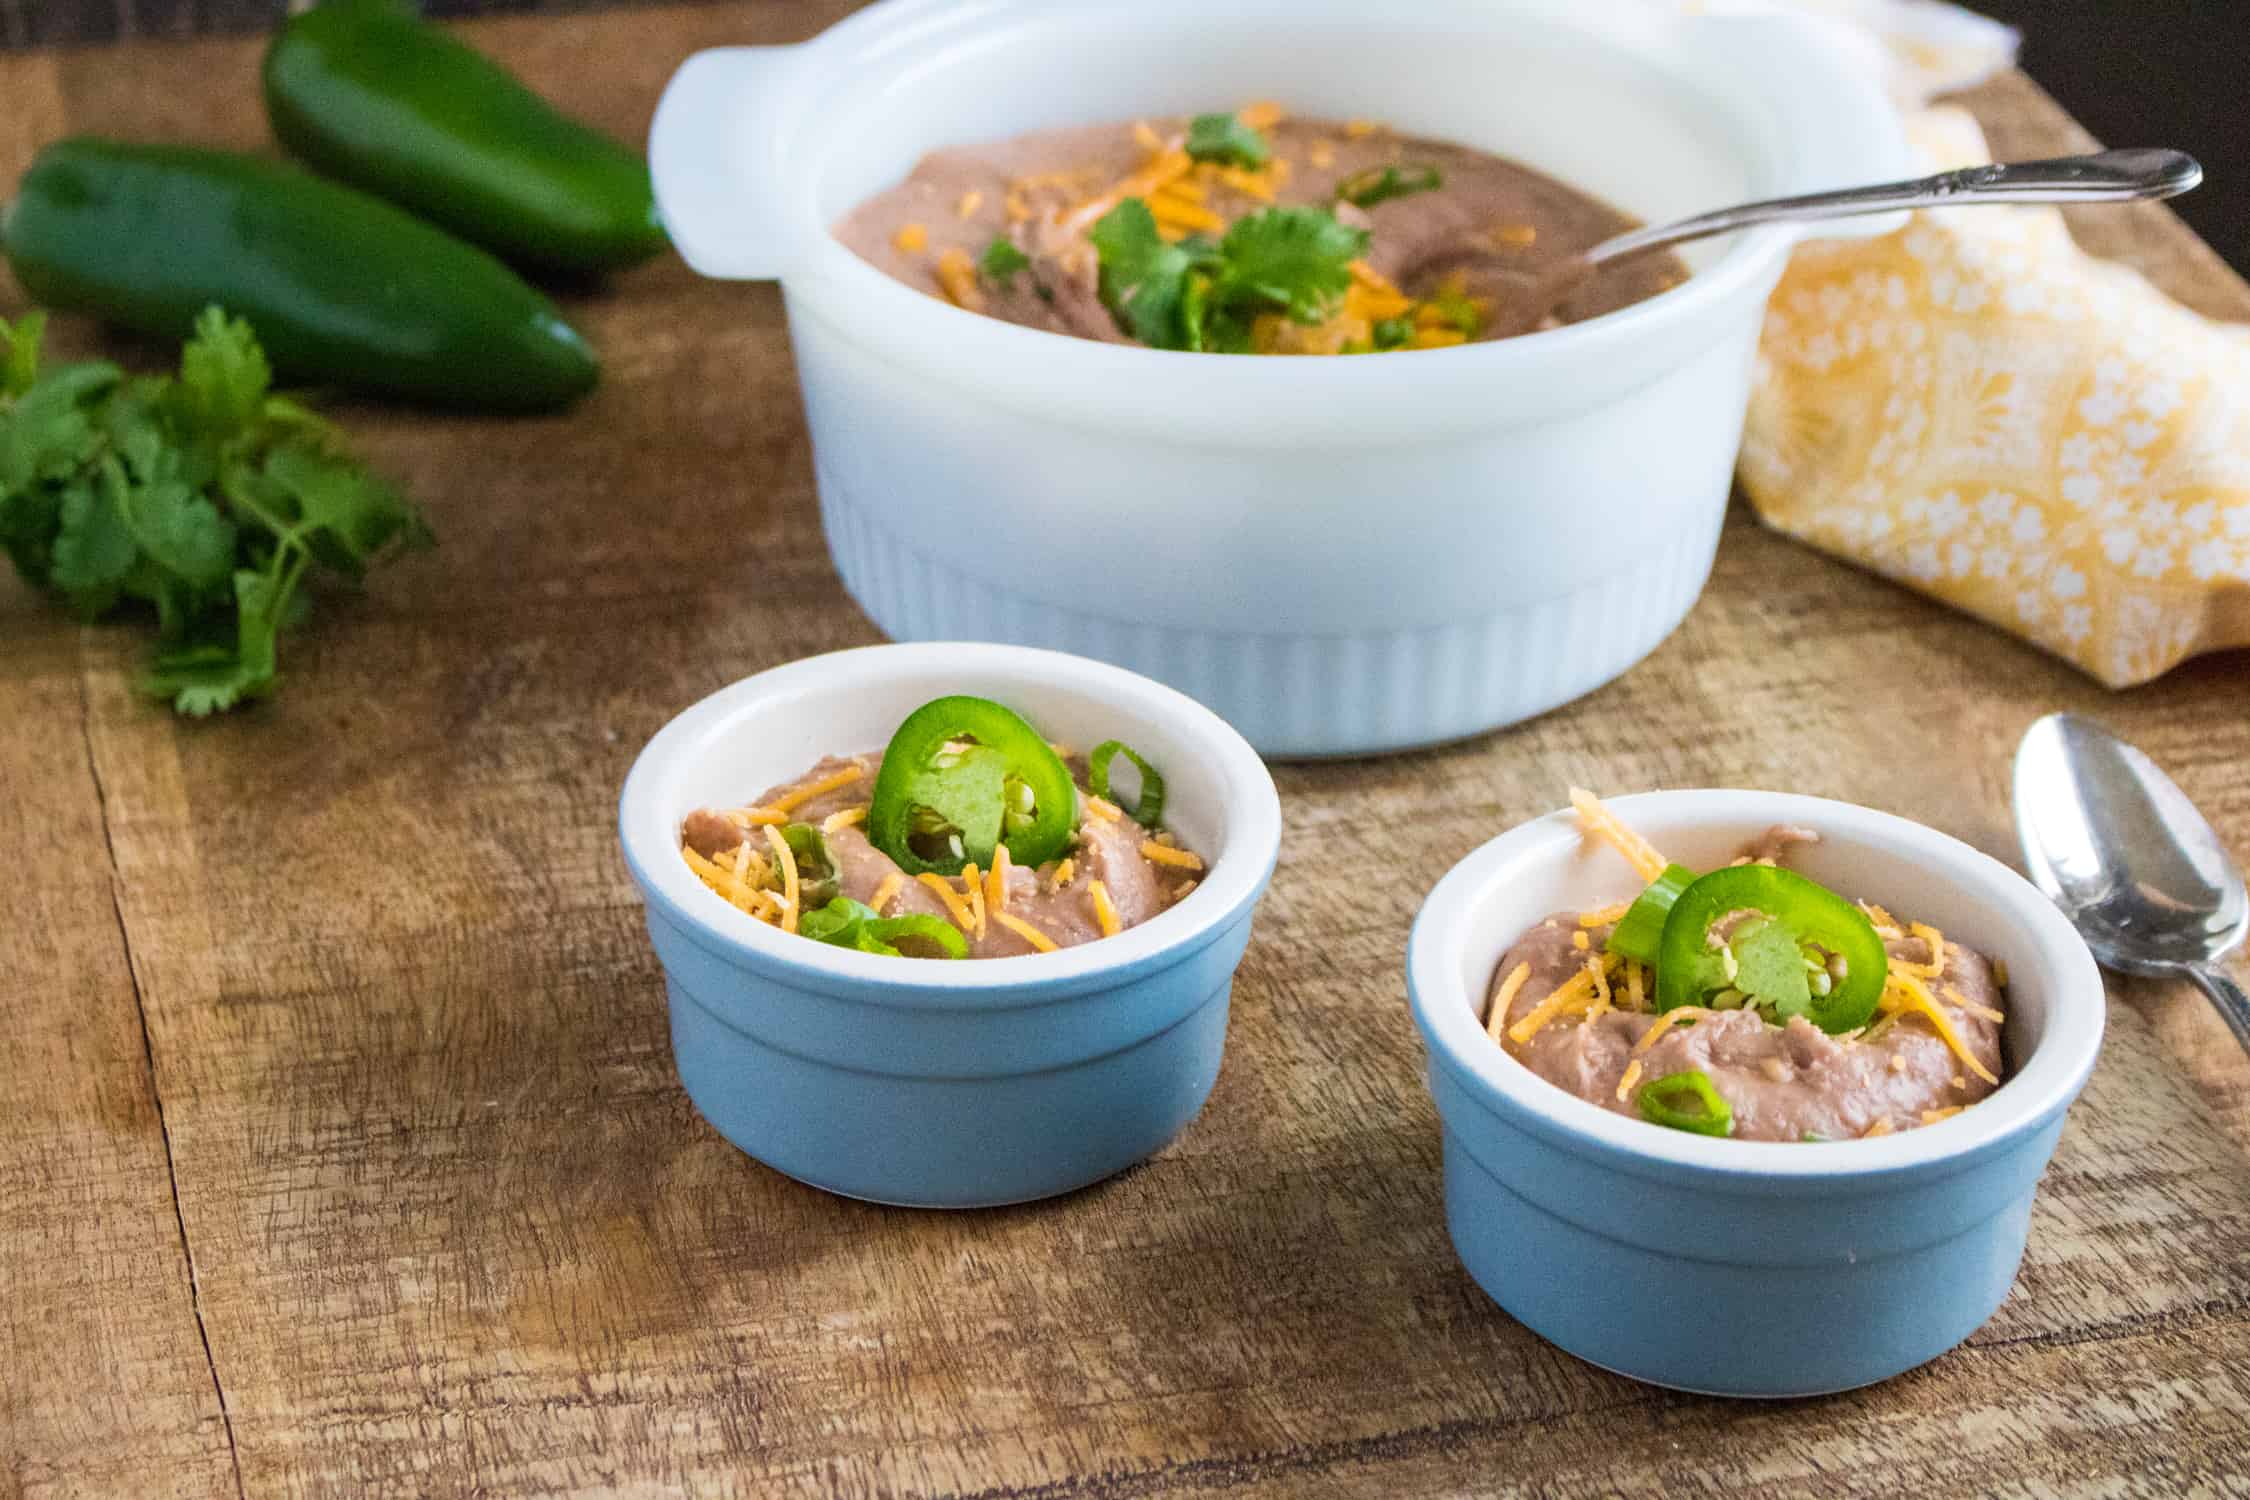 Instant Pot Refried Beans served in two blue bowls and garnished with grated cheese, sliced peppers and cliantro